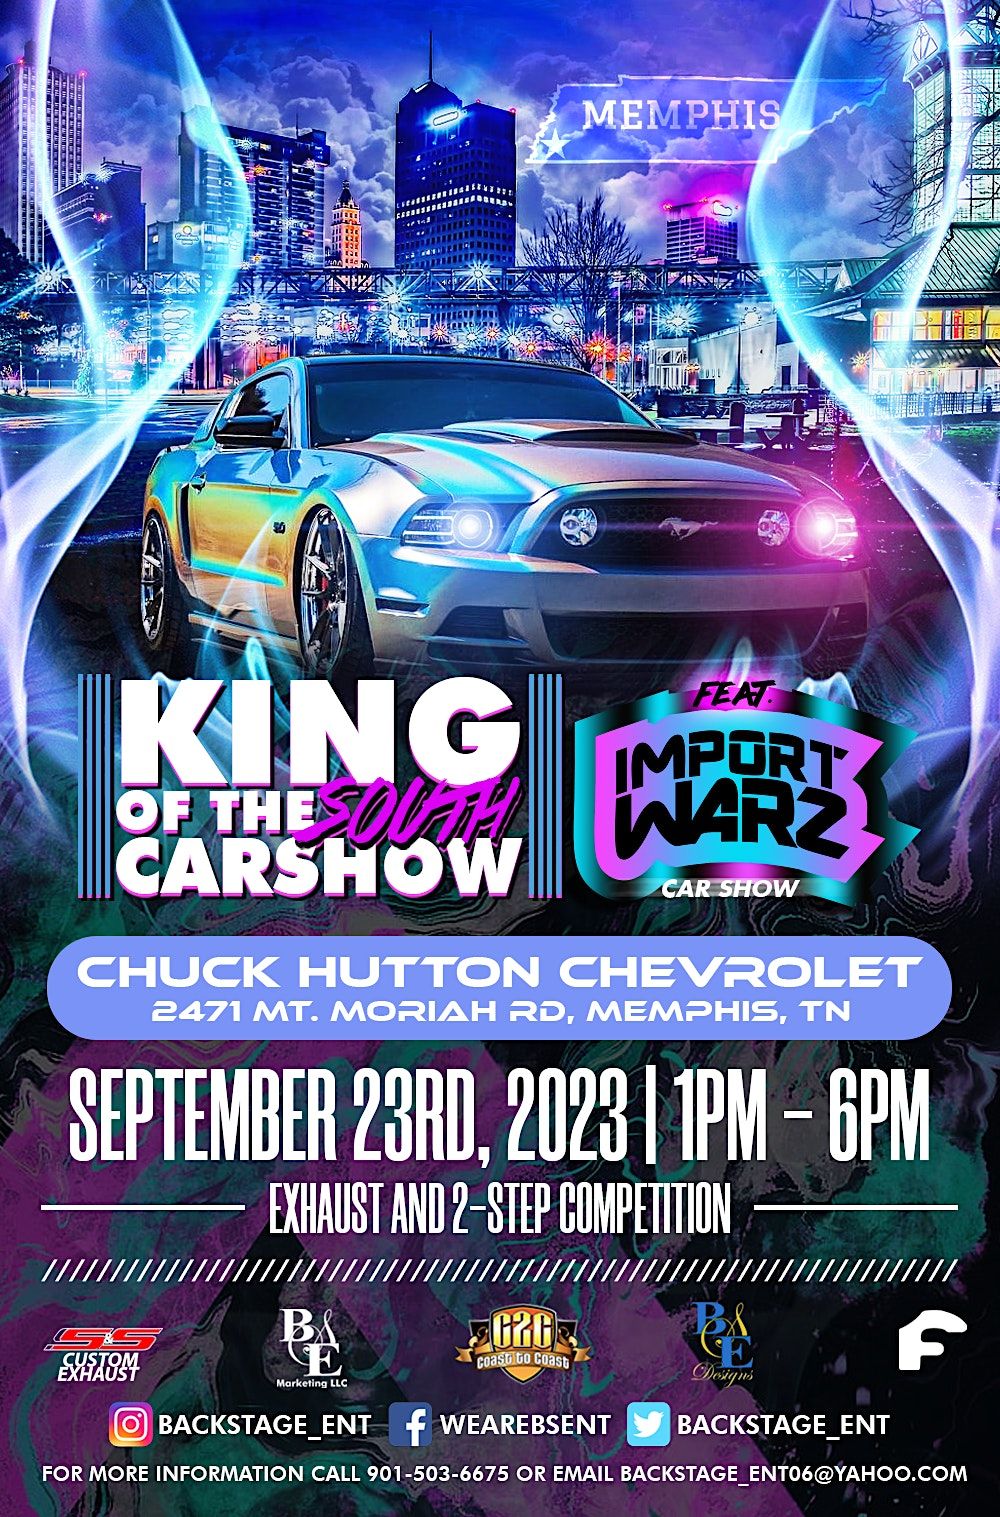 KING OF THE SOUTH FEATURING IMPORT WARZ TOUR 11 MEMPHIS